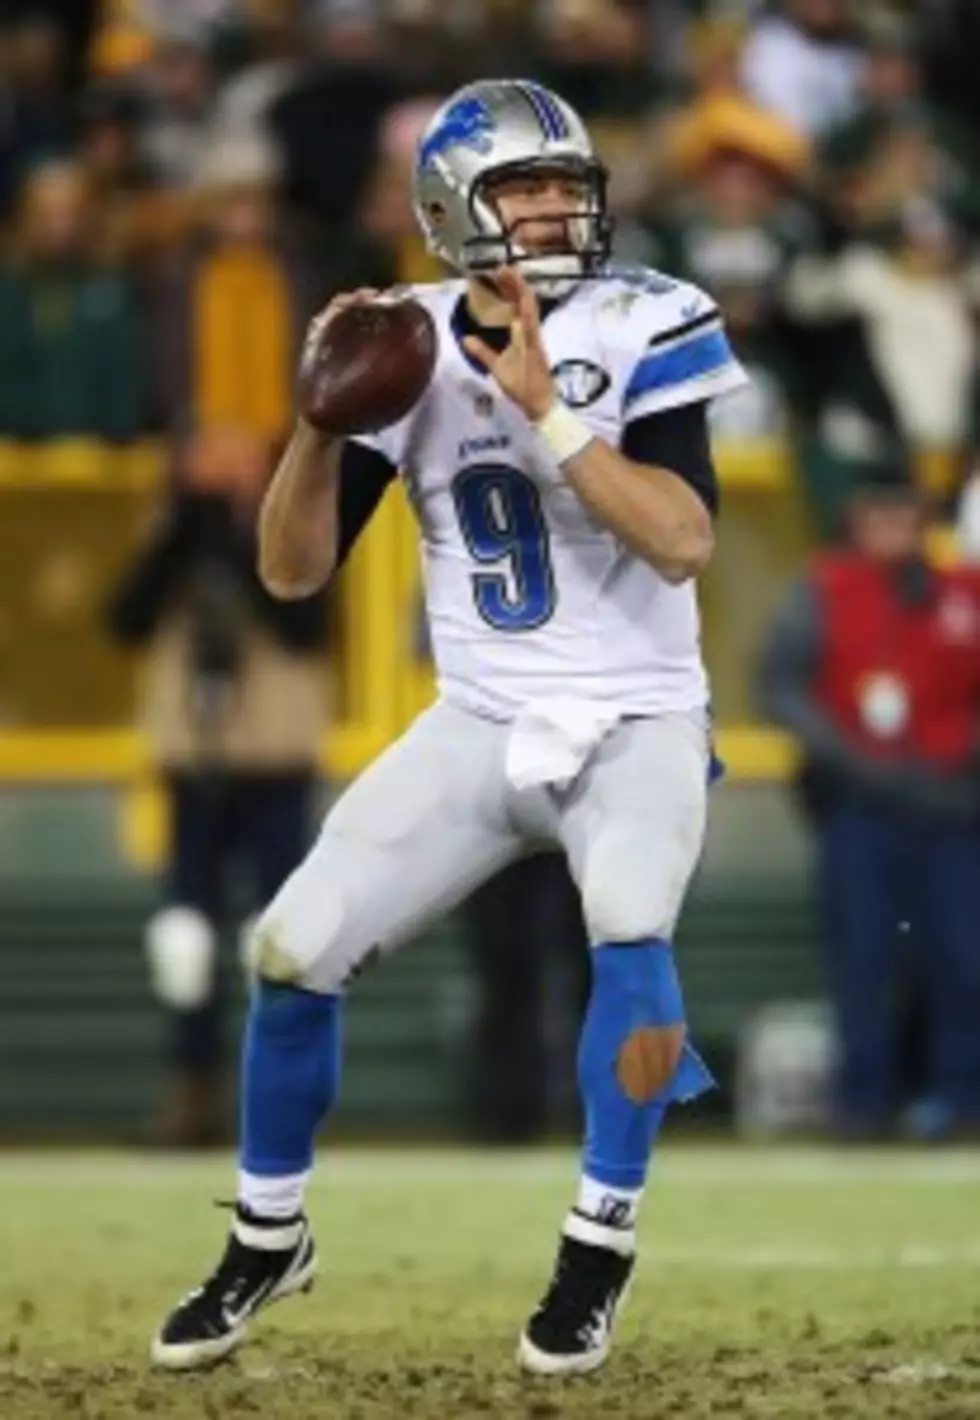 Lions Lose At Green Bay, Head To Dallas For First Round of Playoffs